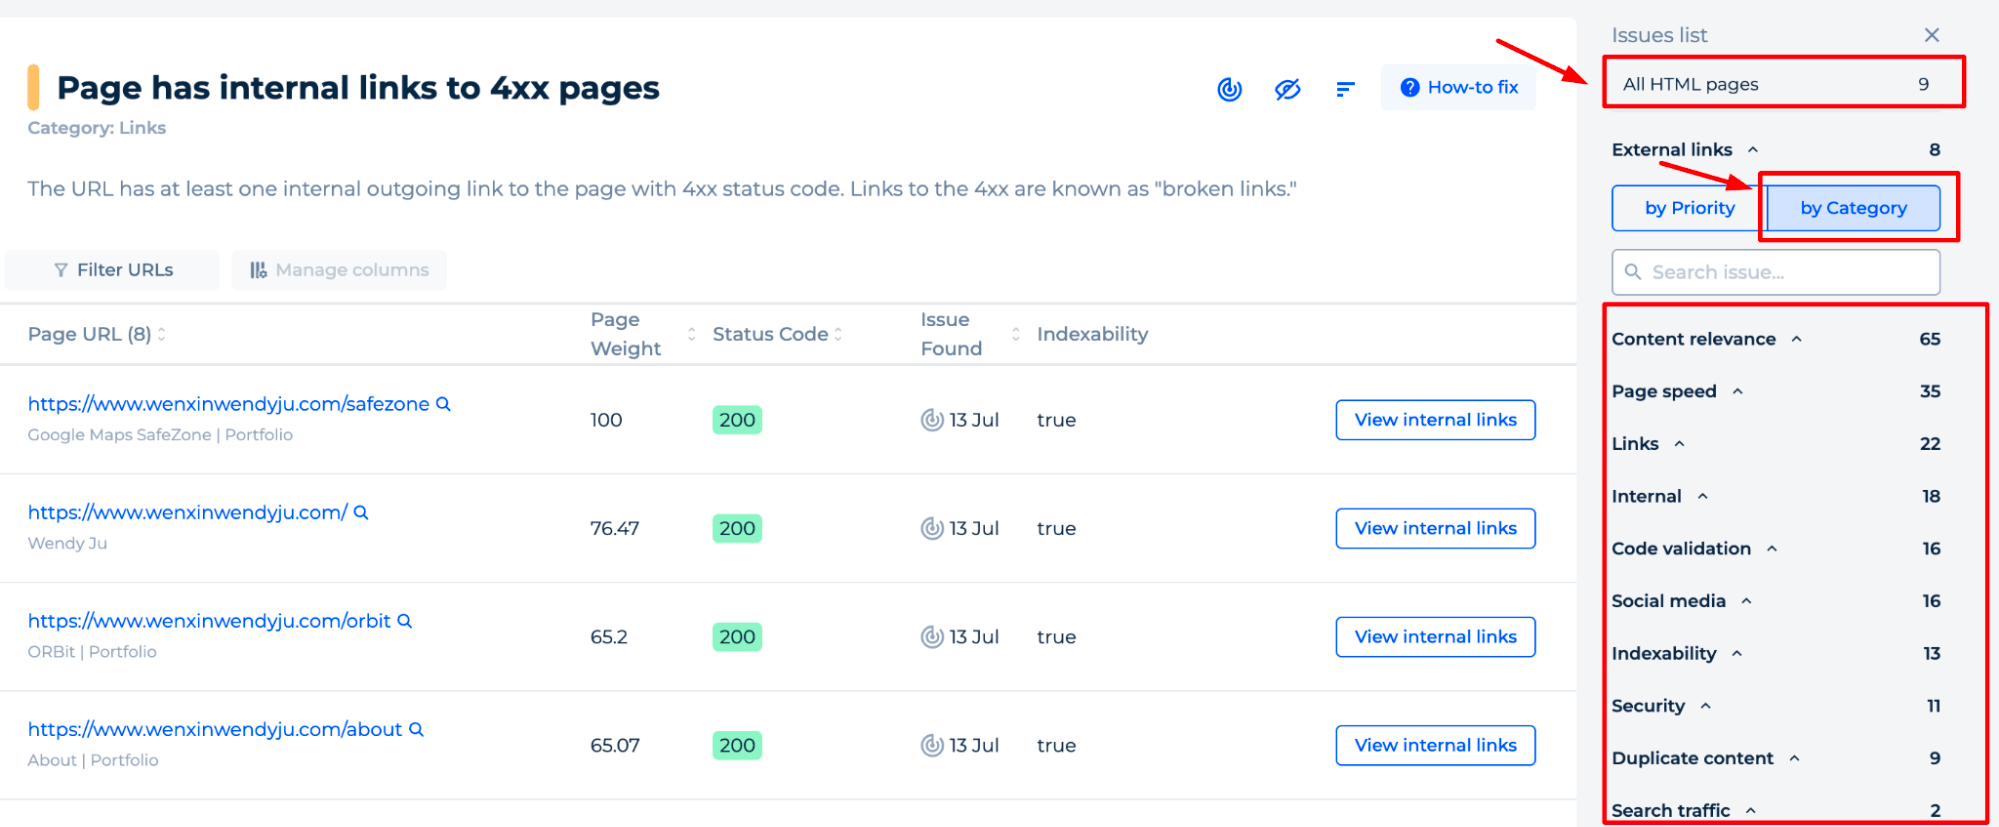 All HTML Pages by Category